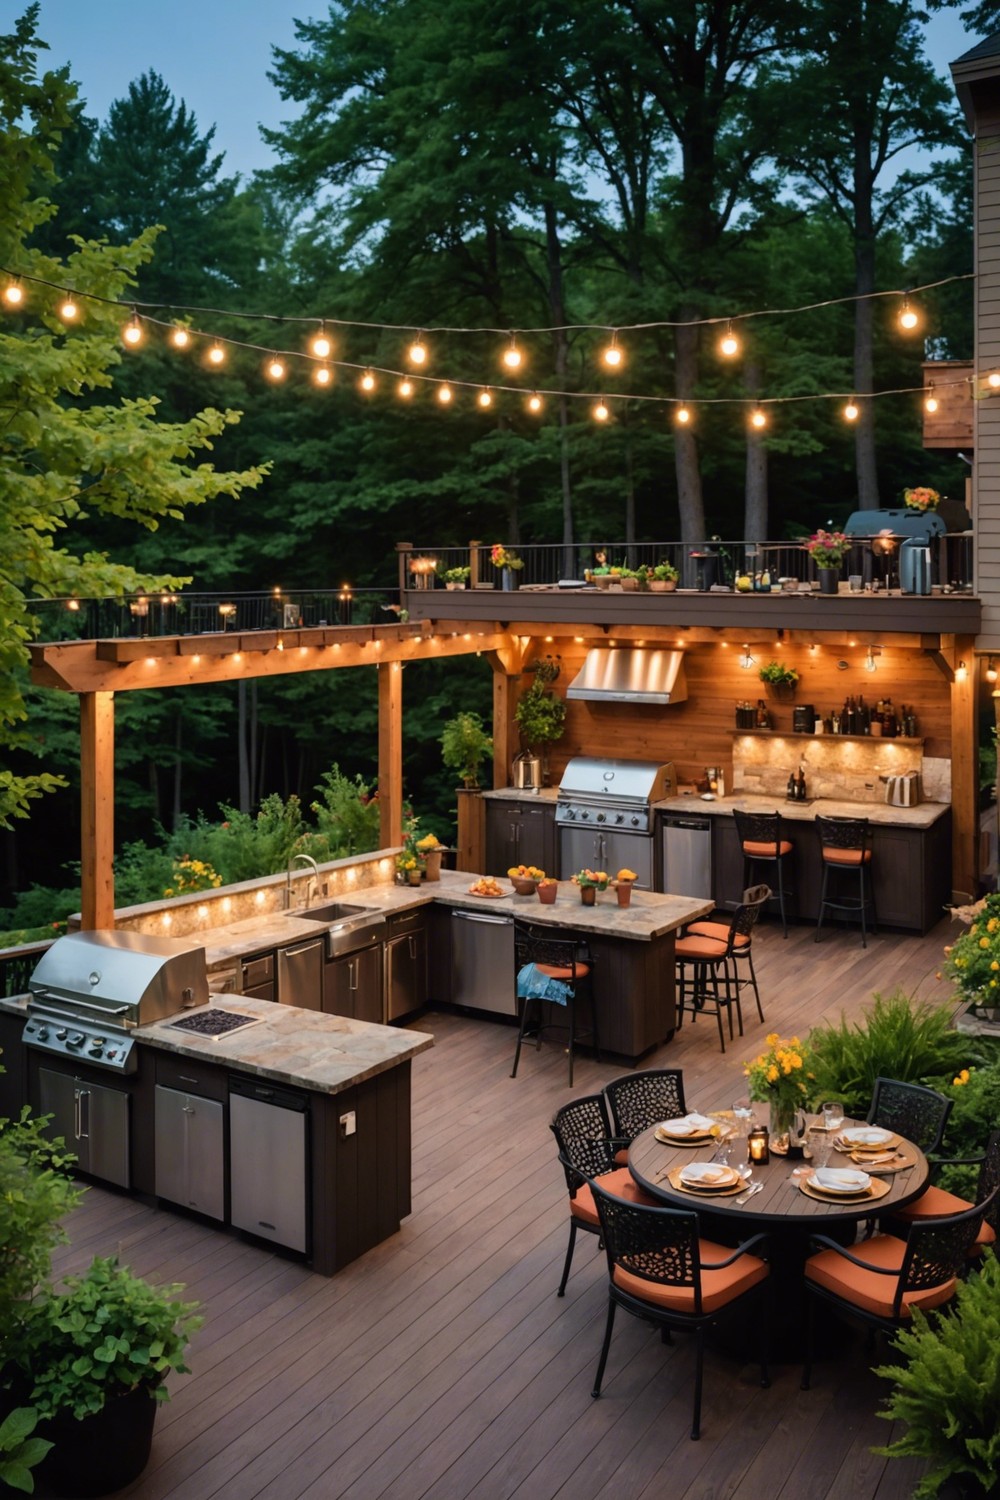 Multi-Tiered Deck with Outdoor Kitchen